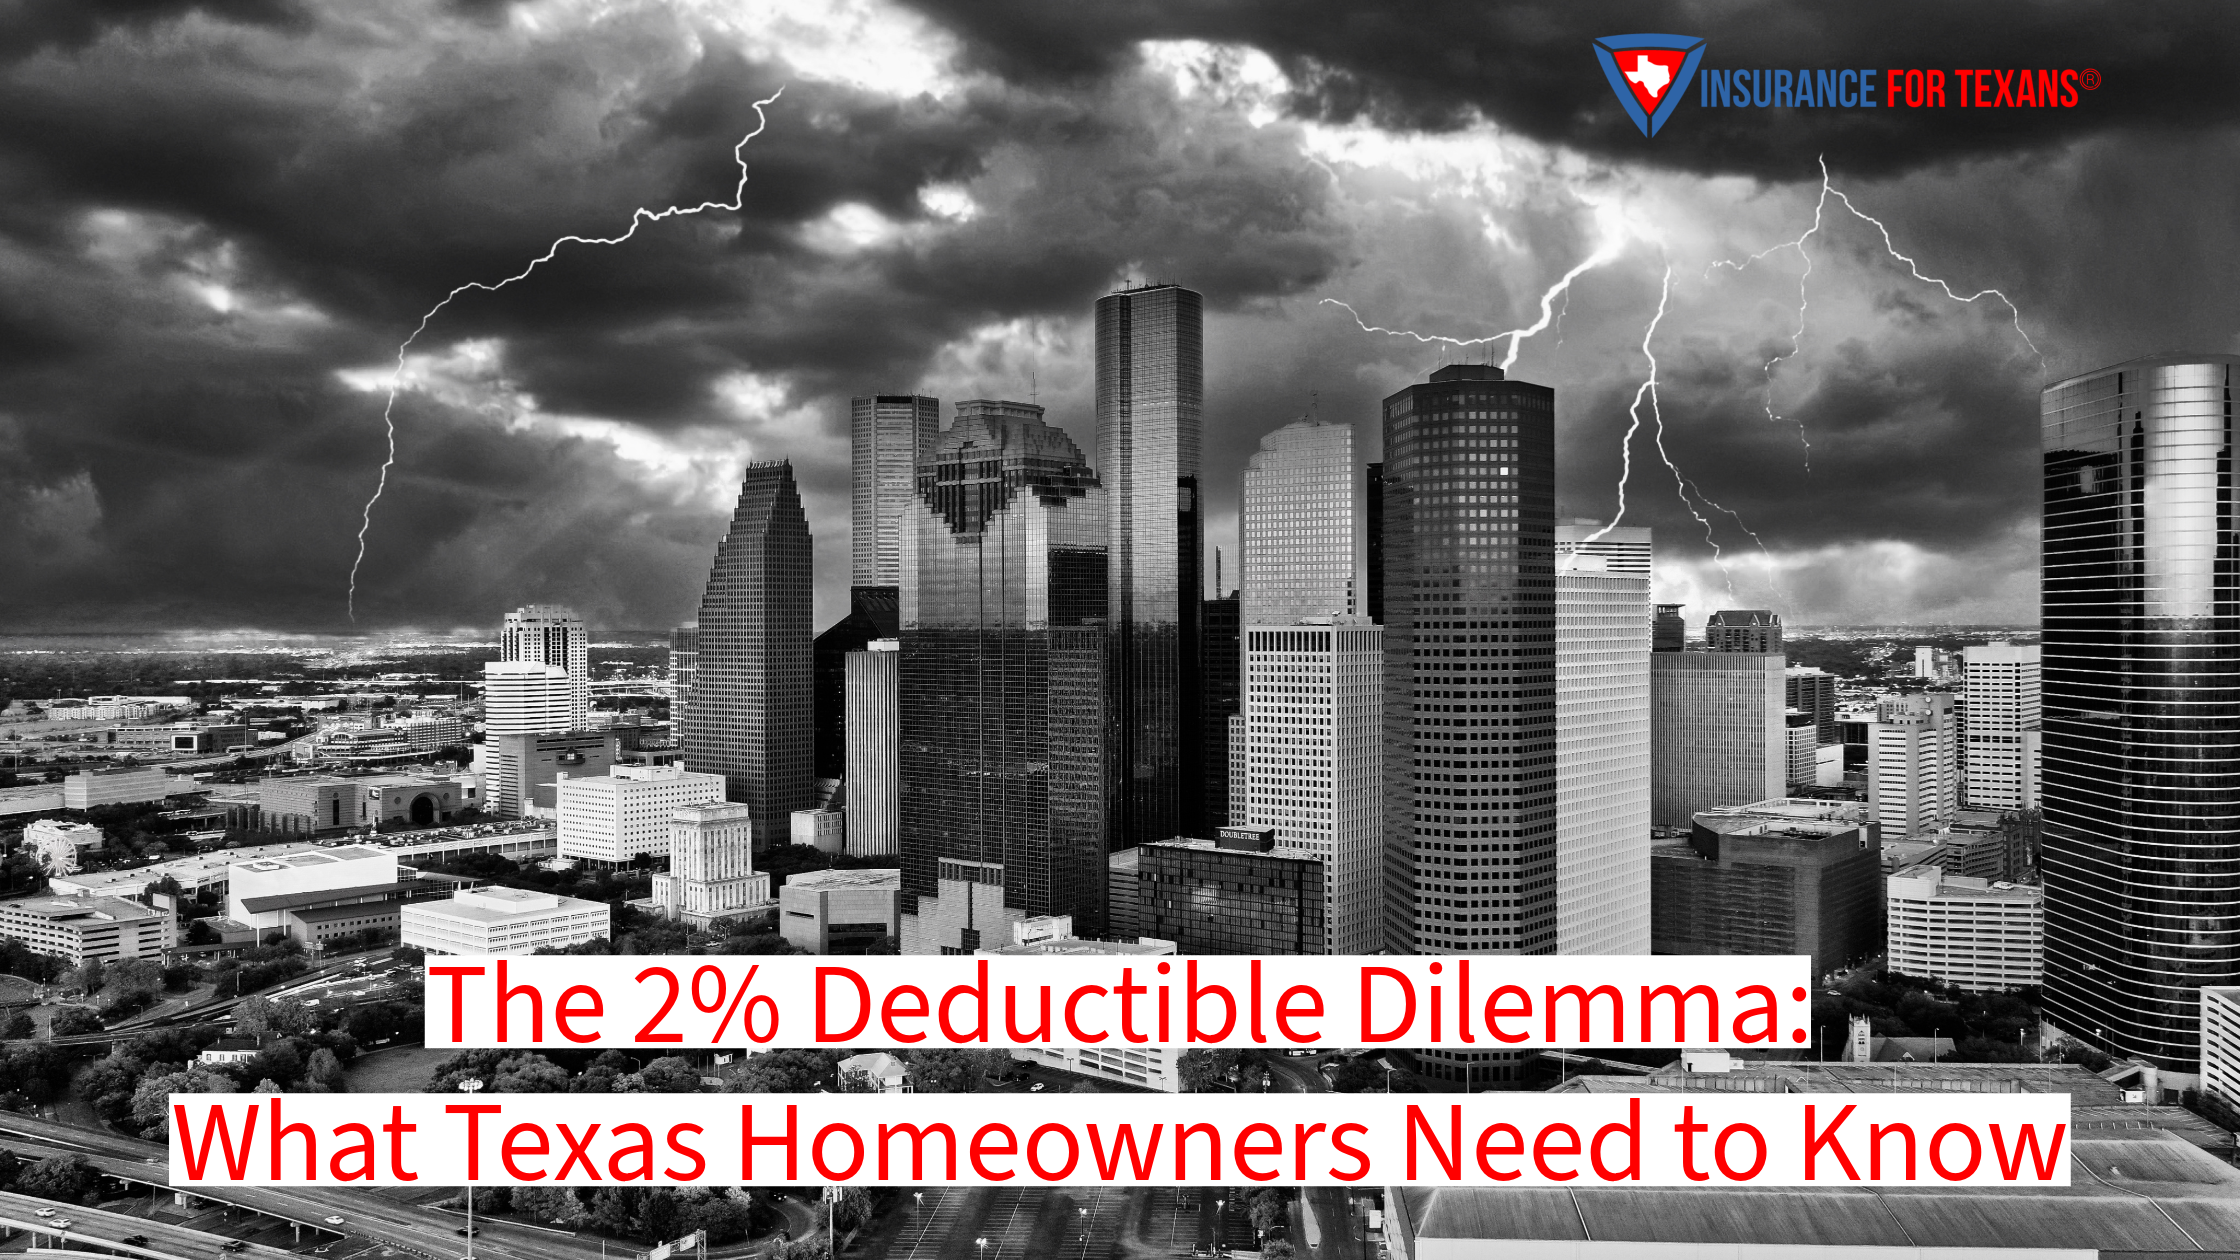 The 2% Deductible Dilemma: What Texas Homeowners Need to Know